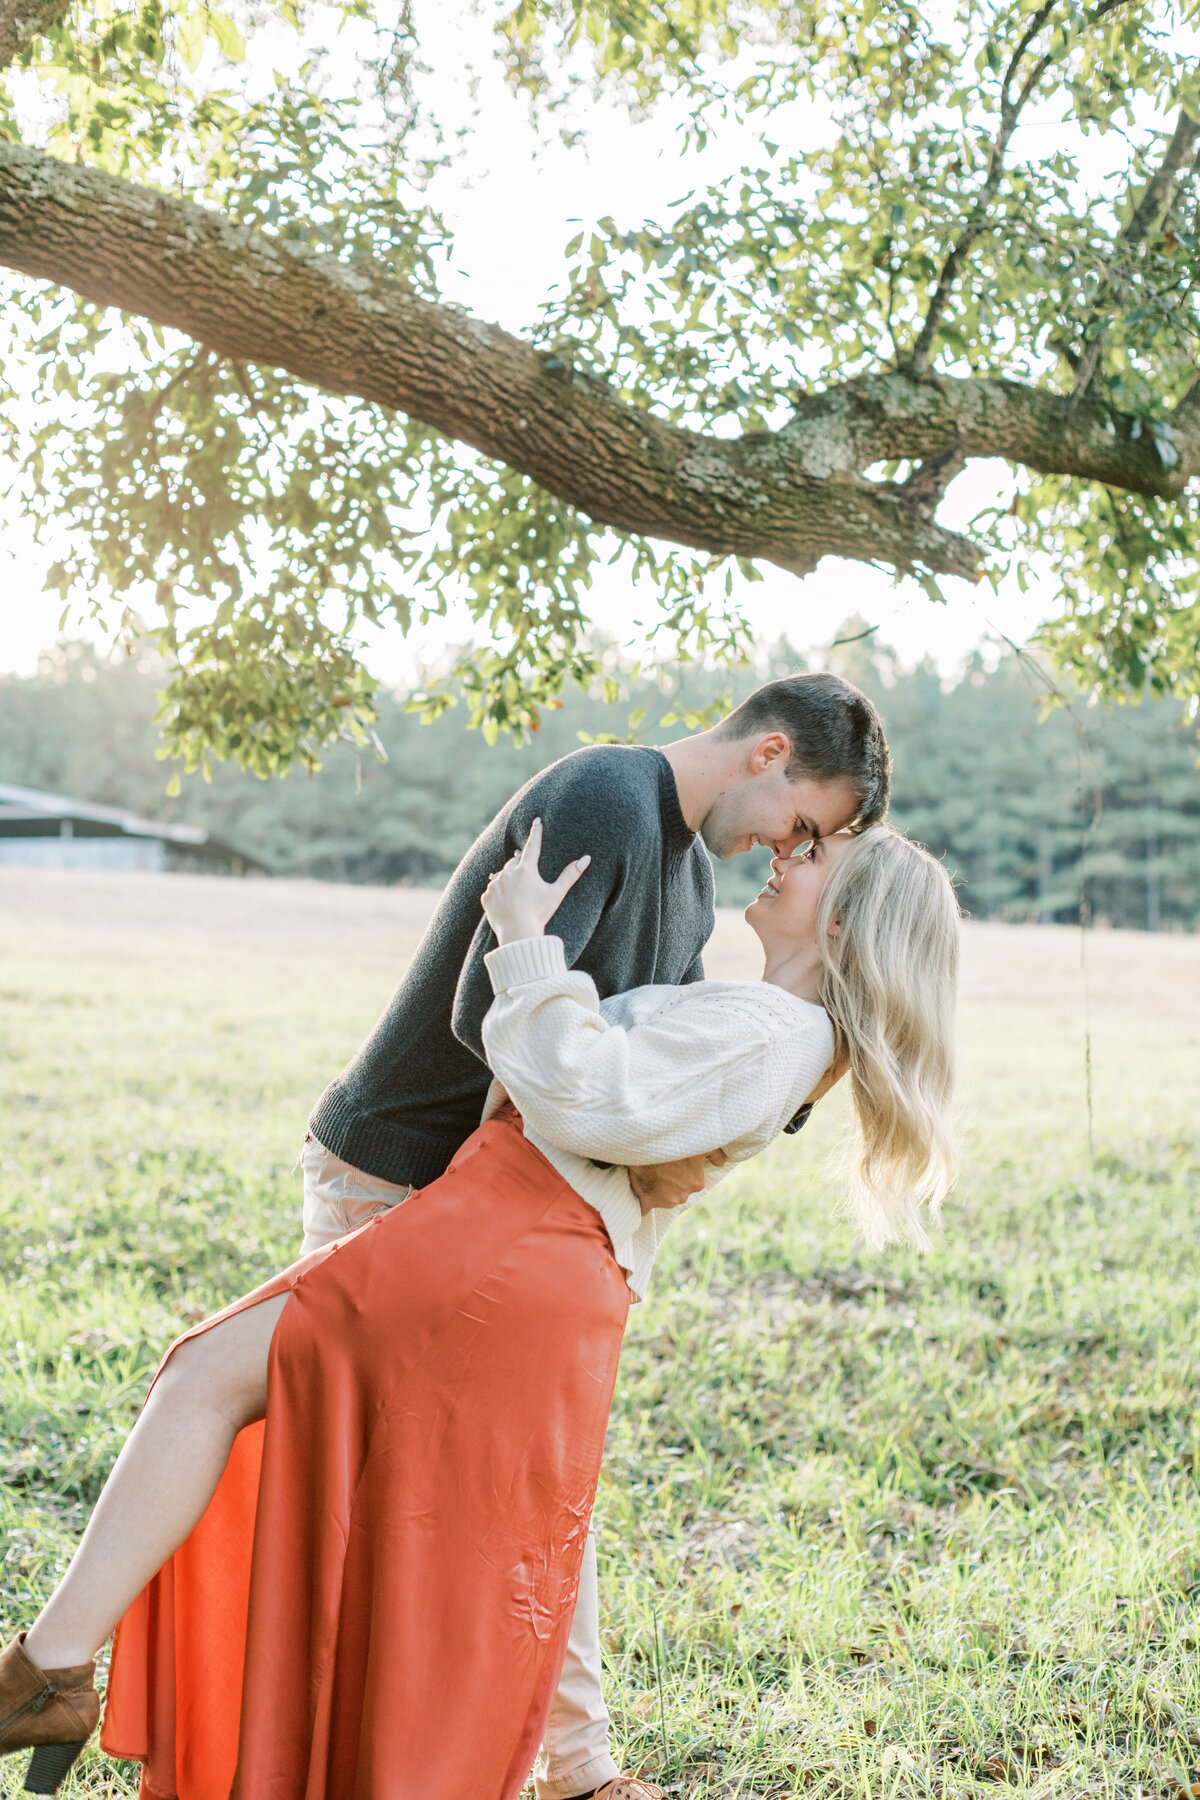 A couple embraces each other in a field.